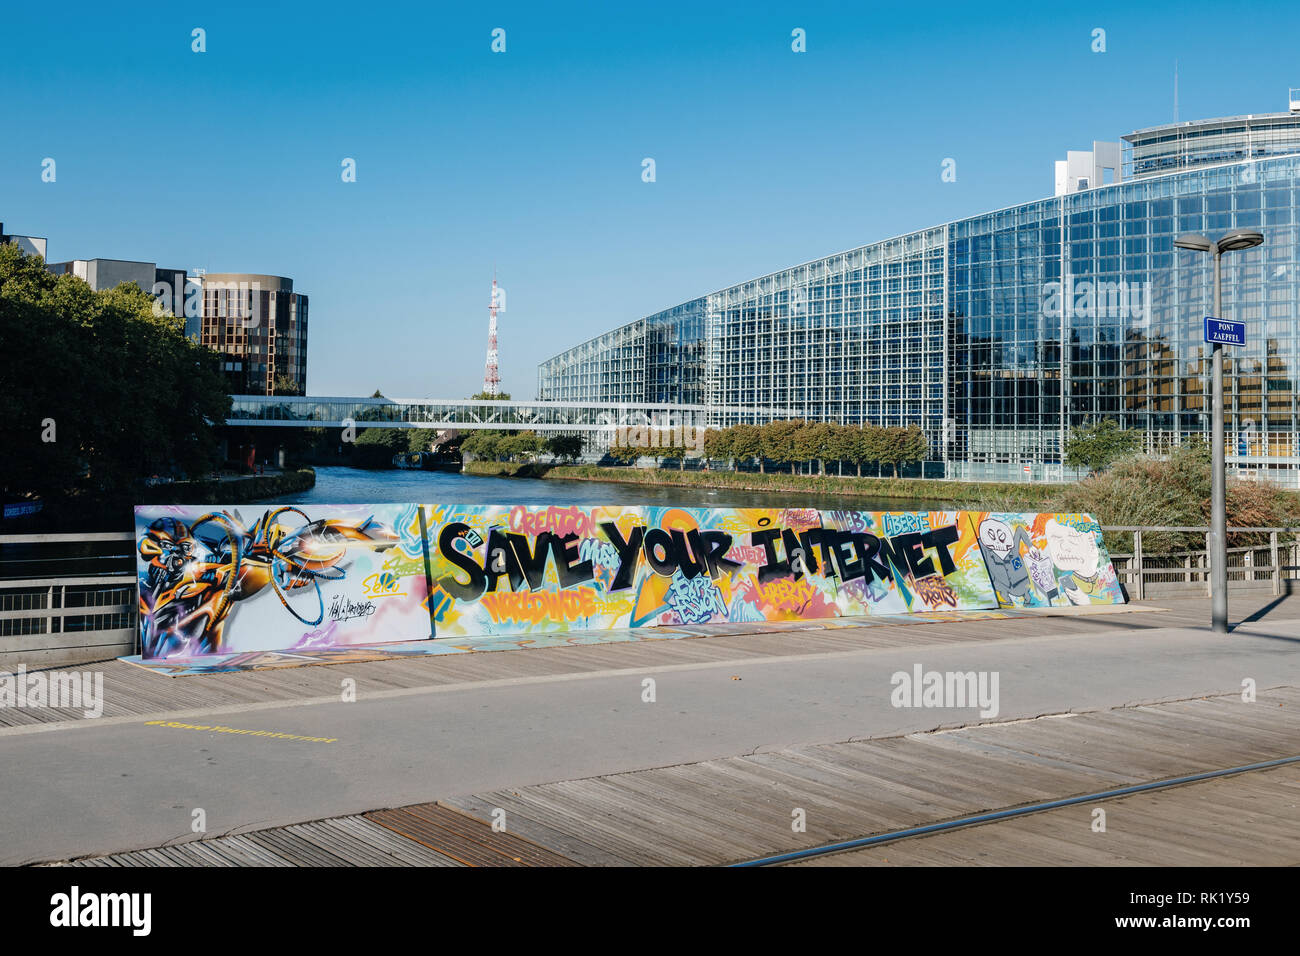 STRASBOURG, FRANCE - SEP 12, 2018: large protest banner Save Your Internet with European parliament in the background on Pont Zaepfel bridge Stock Photo